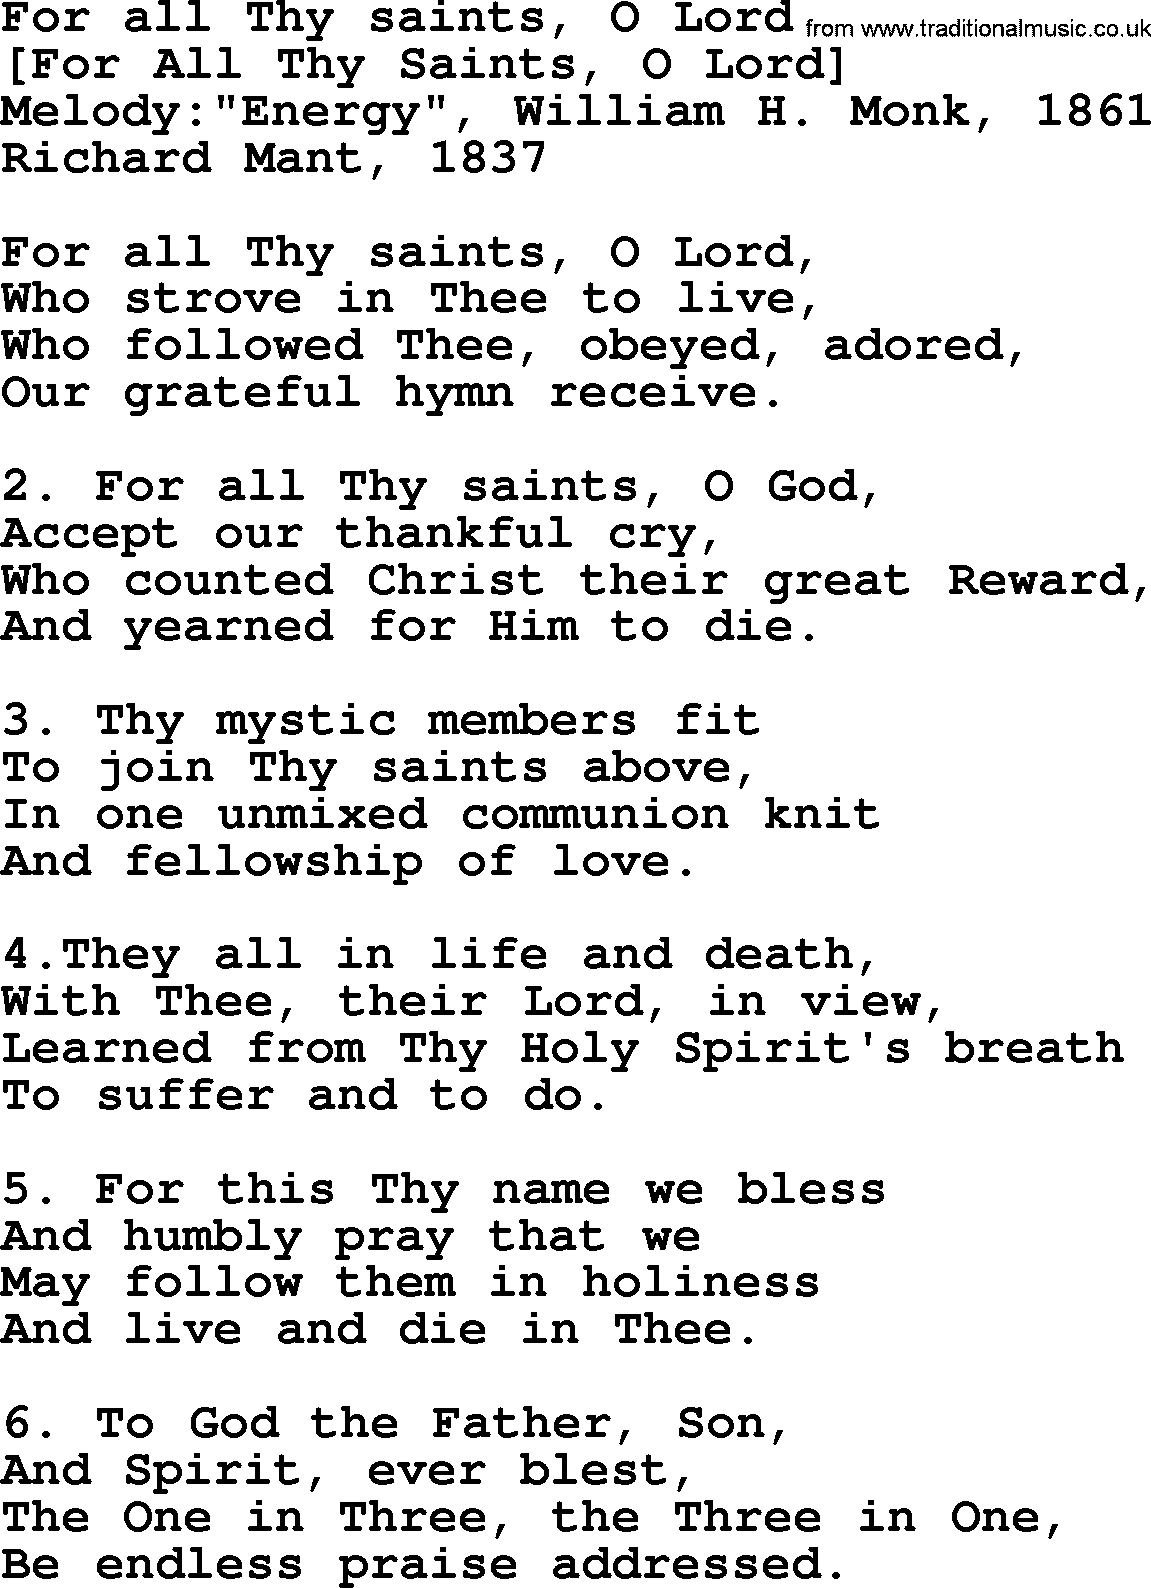 Old English Song: For All Thy Saints, O Lord lyrics